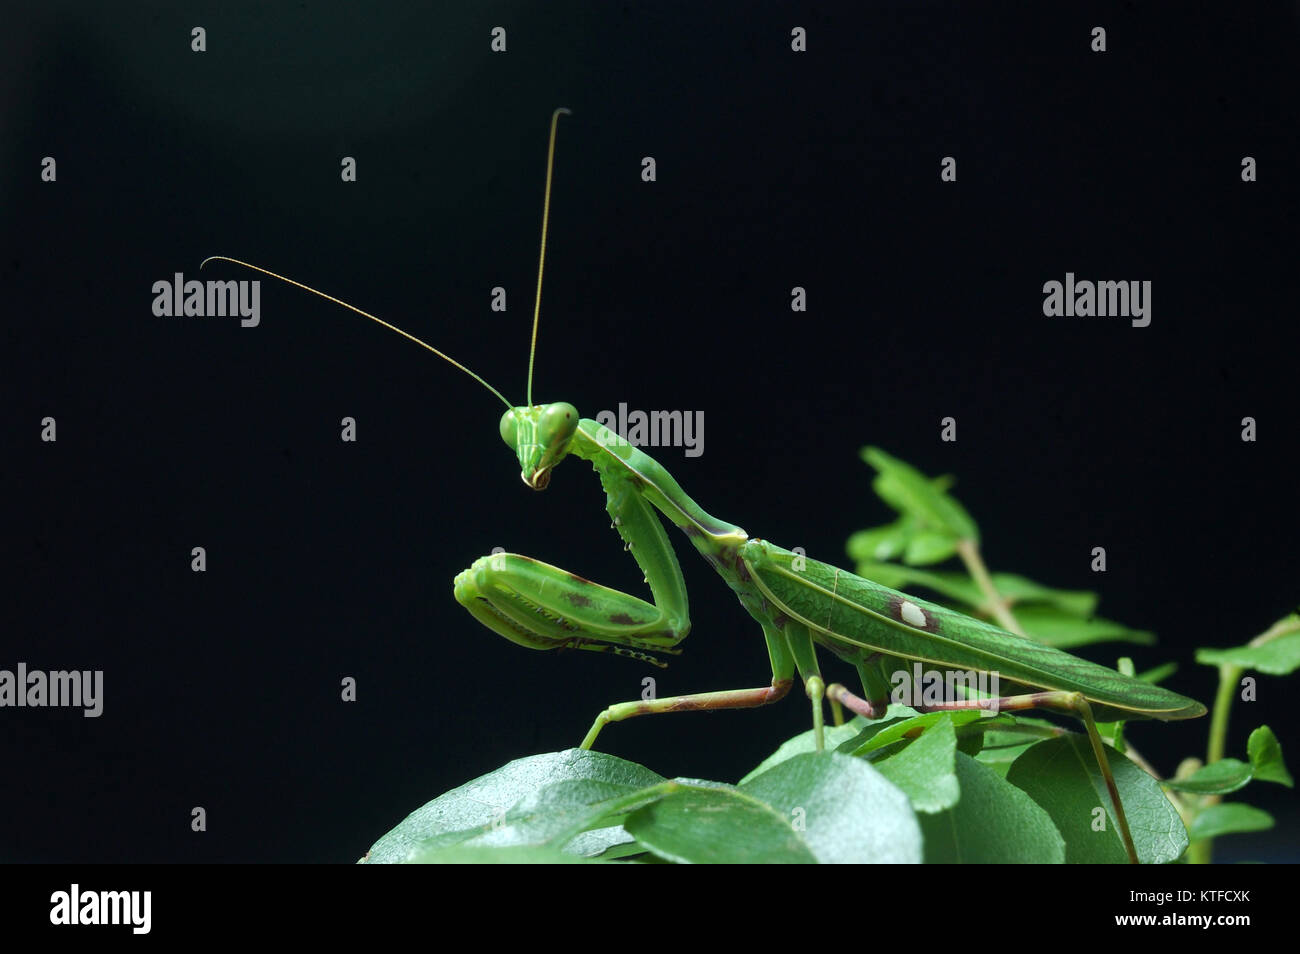 Spotted praying mantis, on leaves in Tamil Nadu, South India Stock Photo